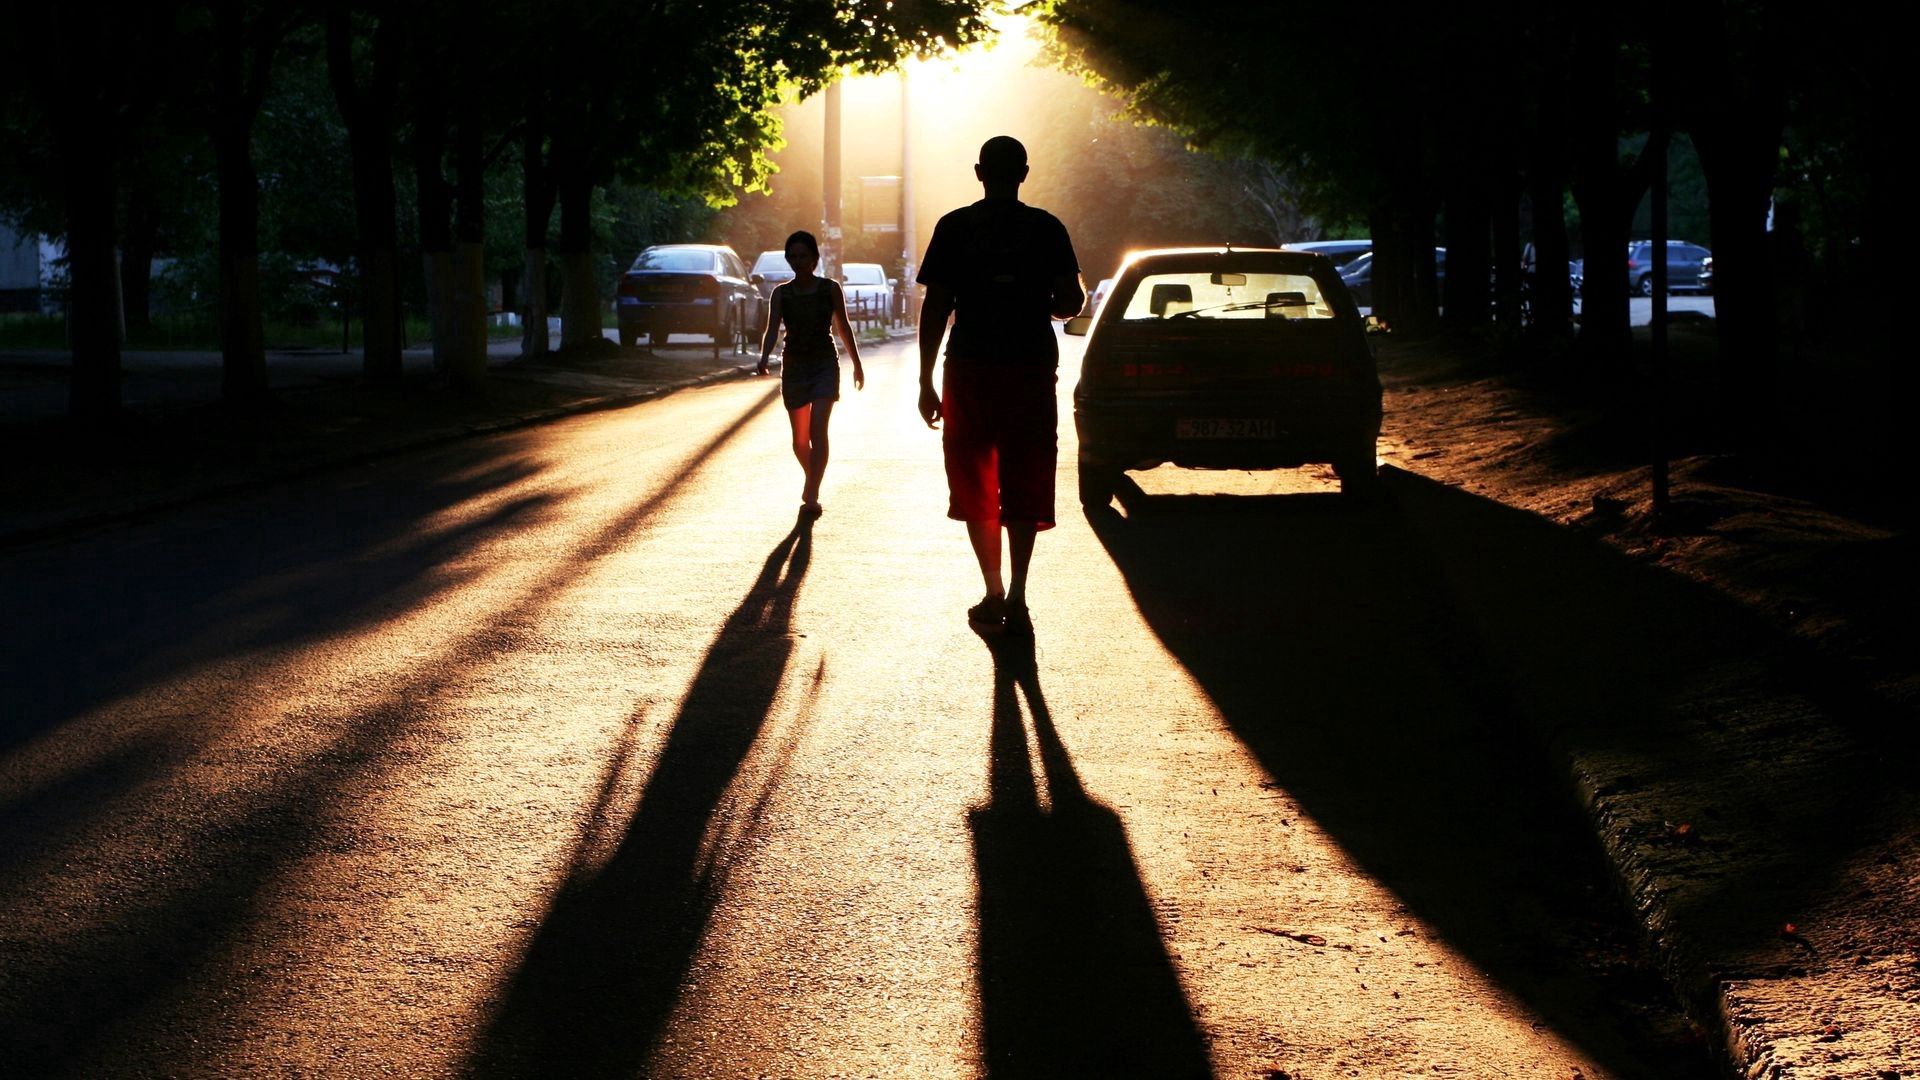 Download background people, cars, miscellanea, miscellaneous, road, silhouettes, shadow, evening